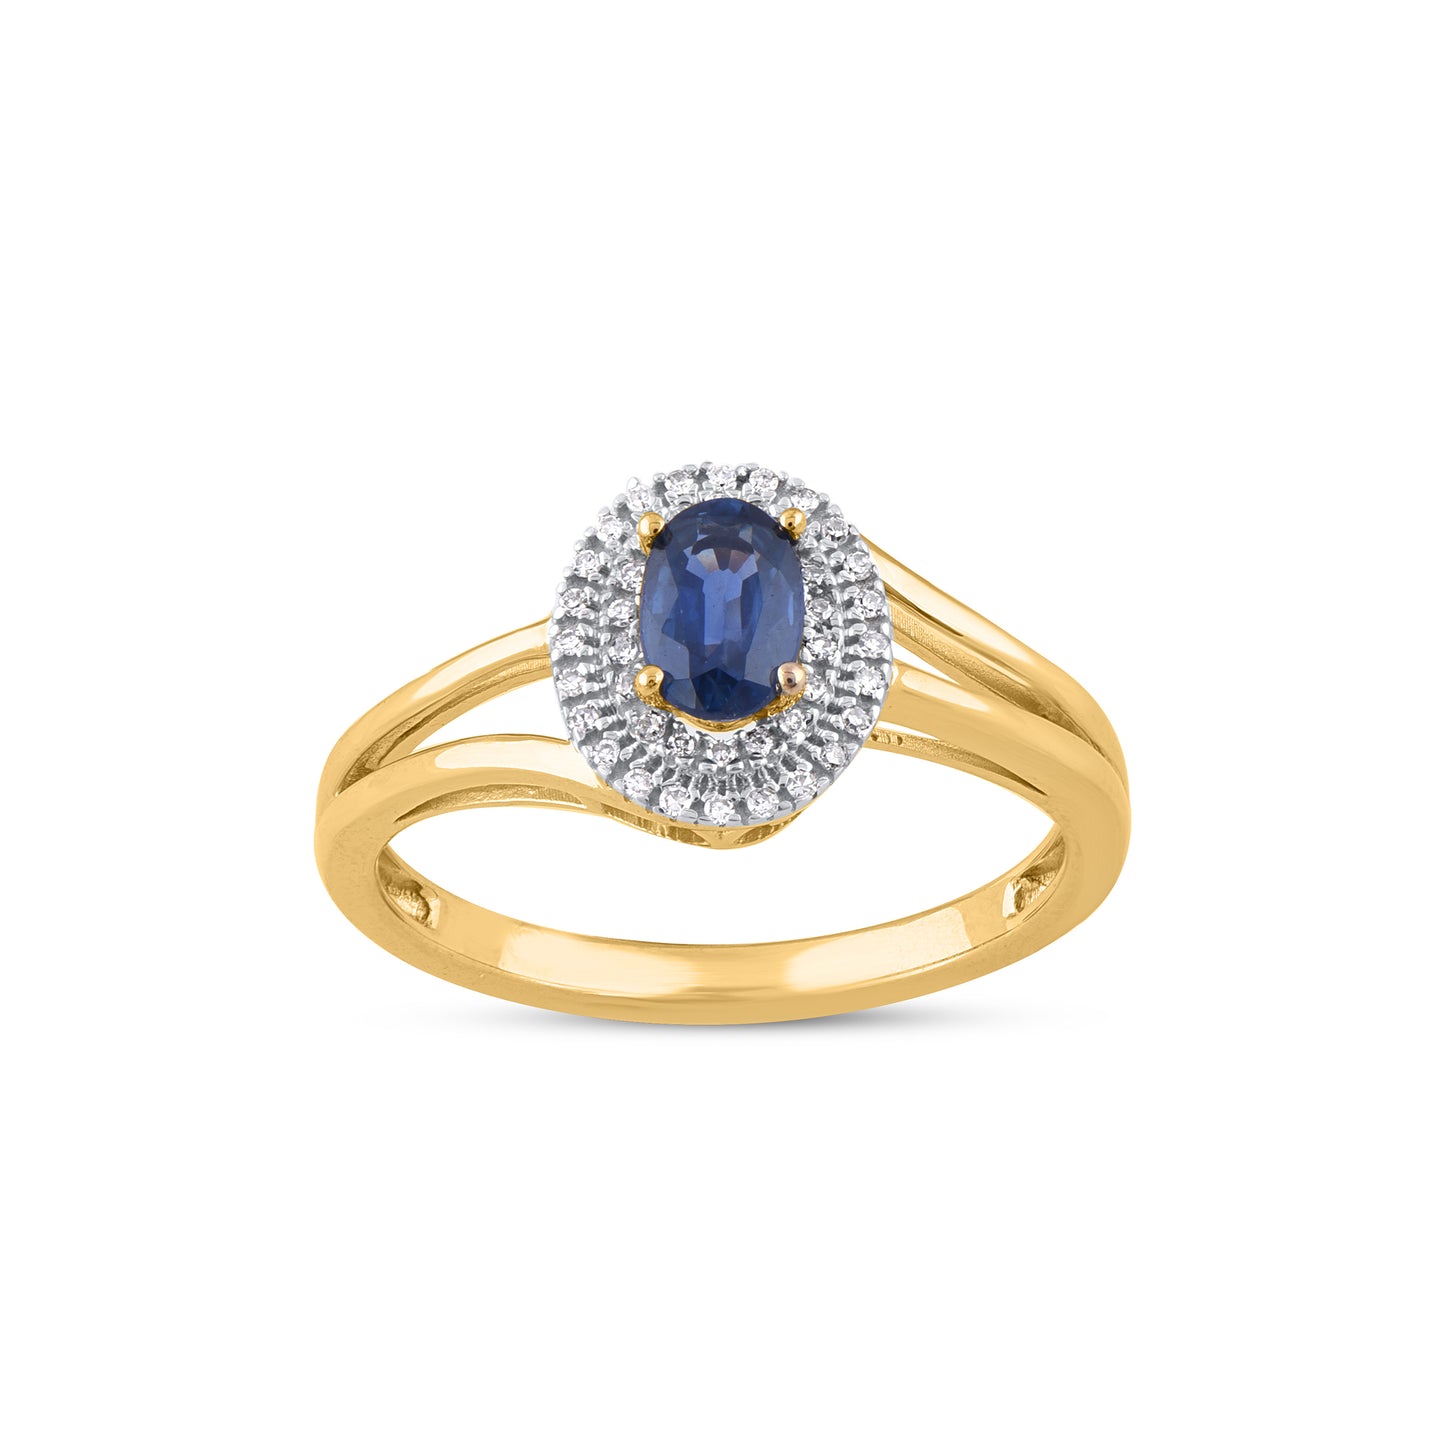 Diamond and Blue Sapphire Halo Ring in .925 Sterling Silver